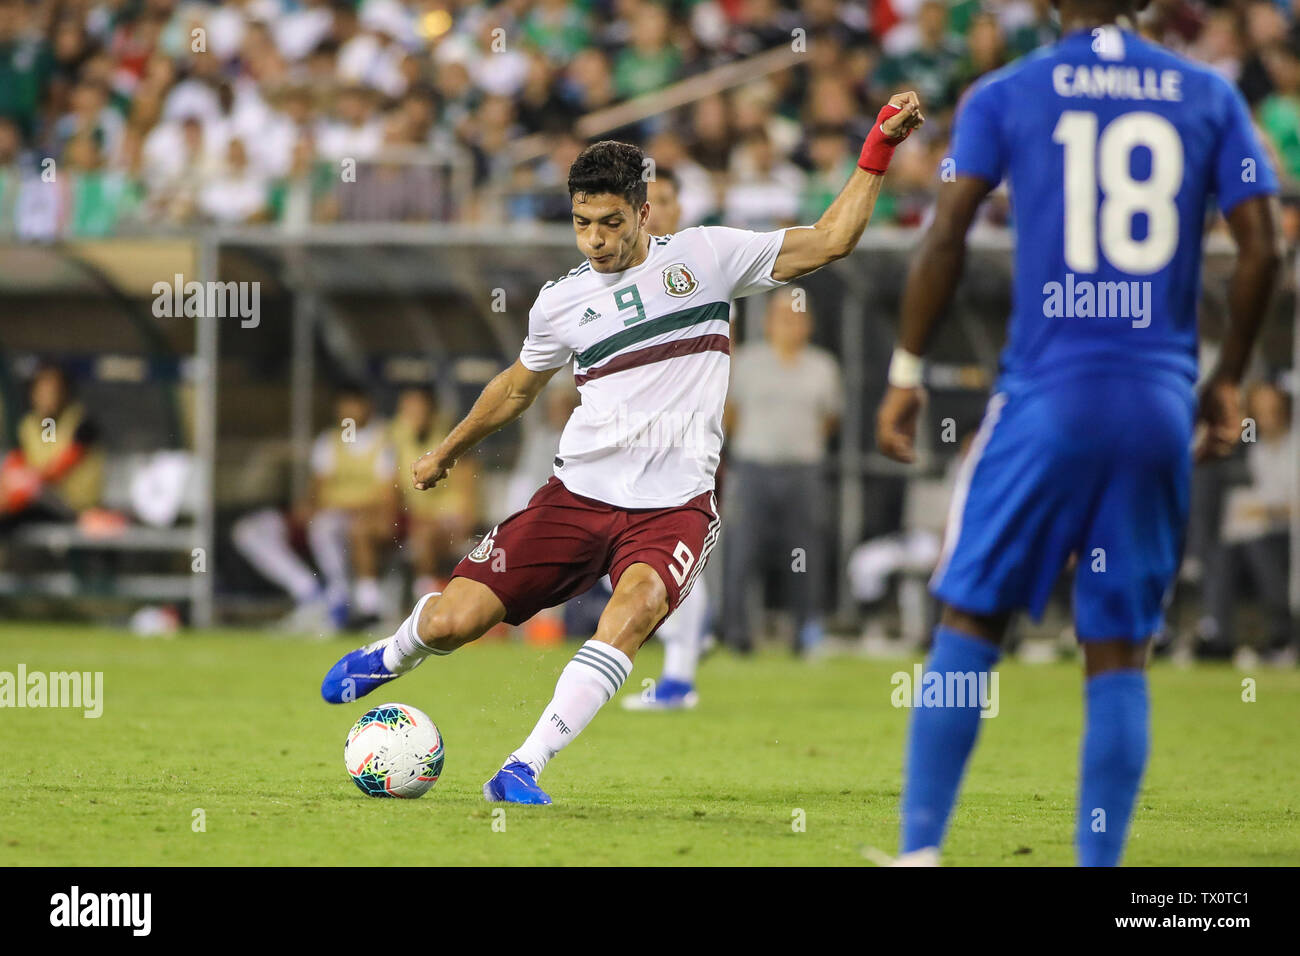 Charlotte, NC, USA. 23rd June, 2019. Mexico forward Raul Jimenez (9) takes a shot on goal during the CONCACAF Gold Cup soccer match between Martinique and Mexico held at Bank of America Stadium in Charlotte, NC. Jonathan Huff/CSM/Alamy Live News Stock Photo